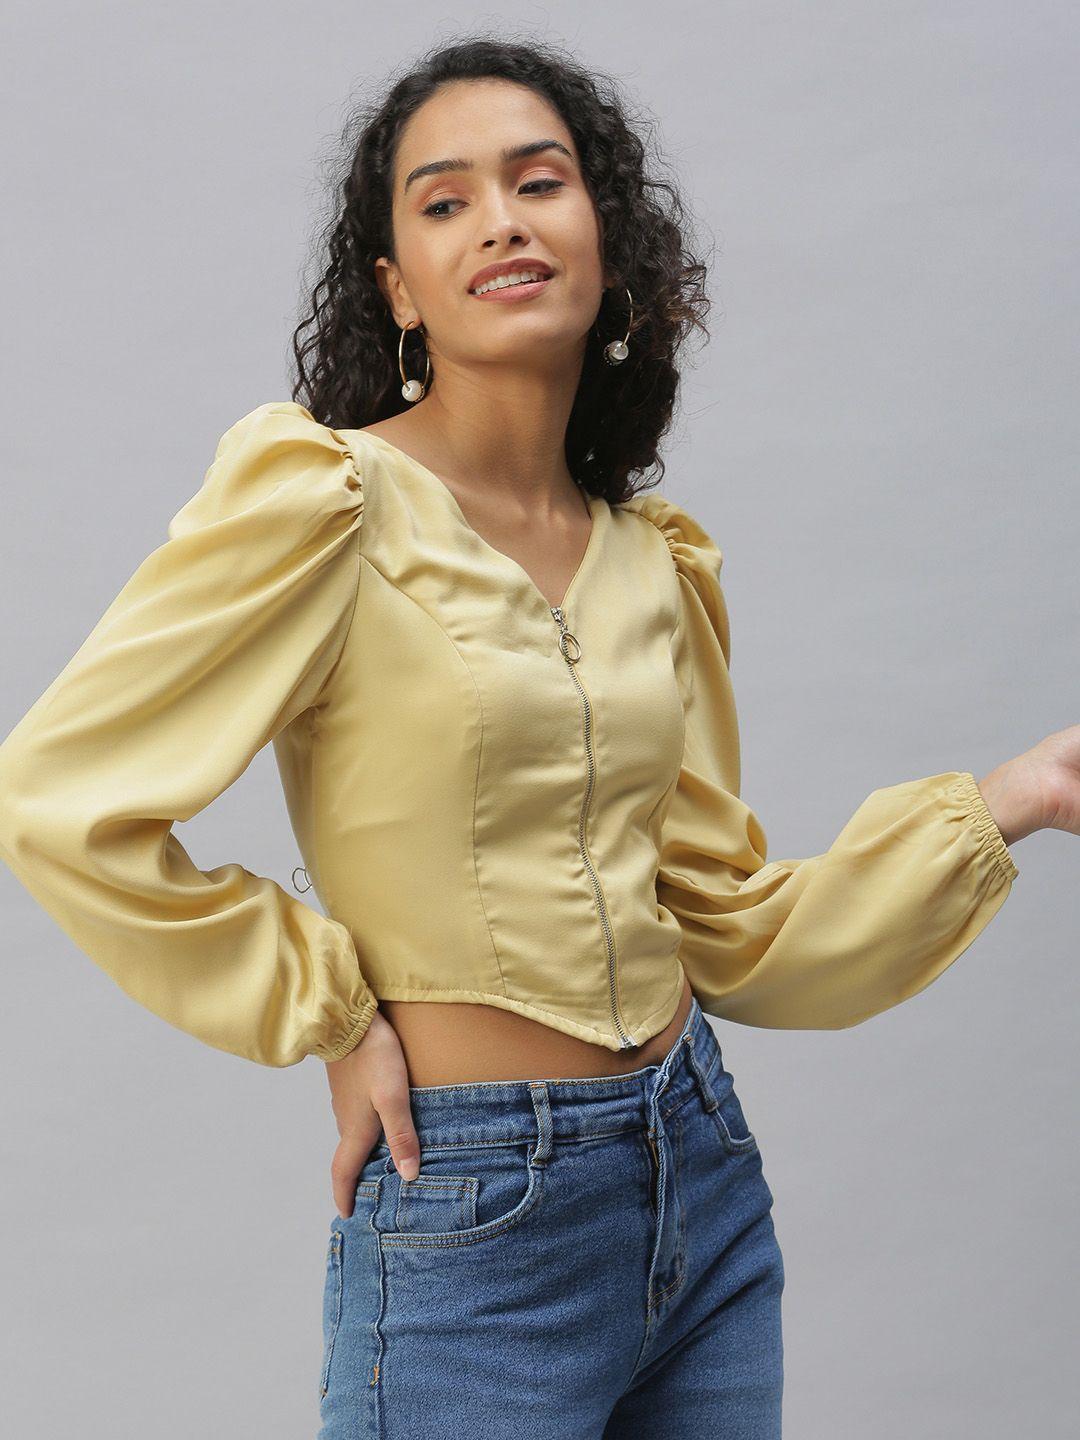 showoff champagne smocked shirt style crop top